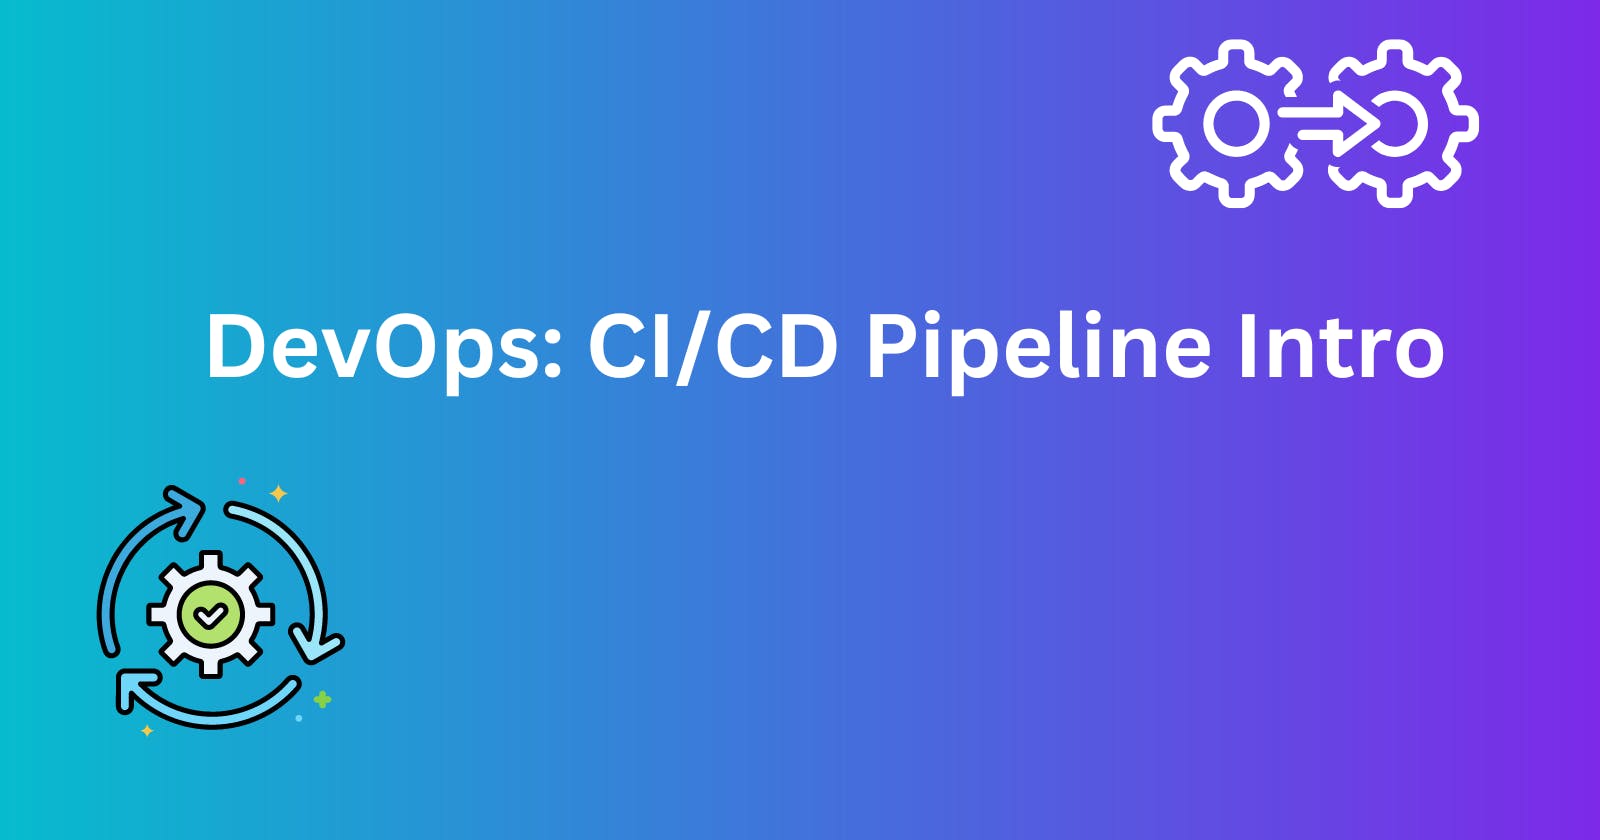 DevOps: Introduction to the CI/CD pipeline